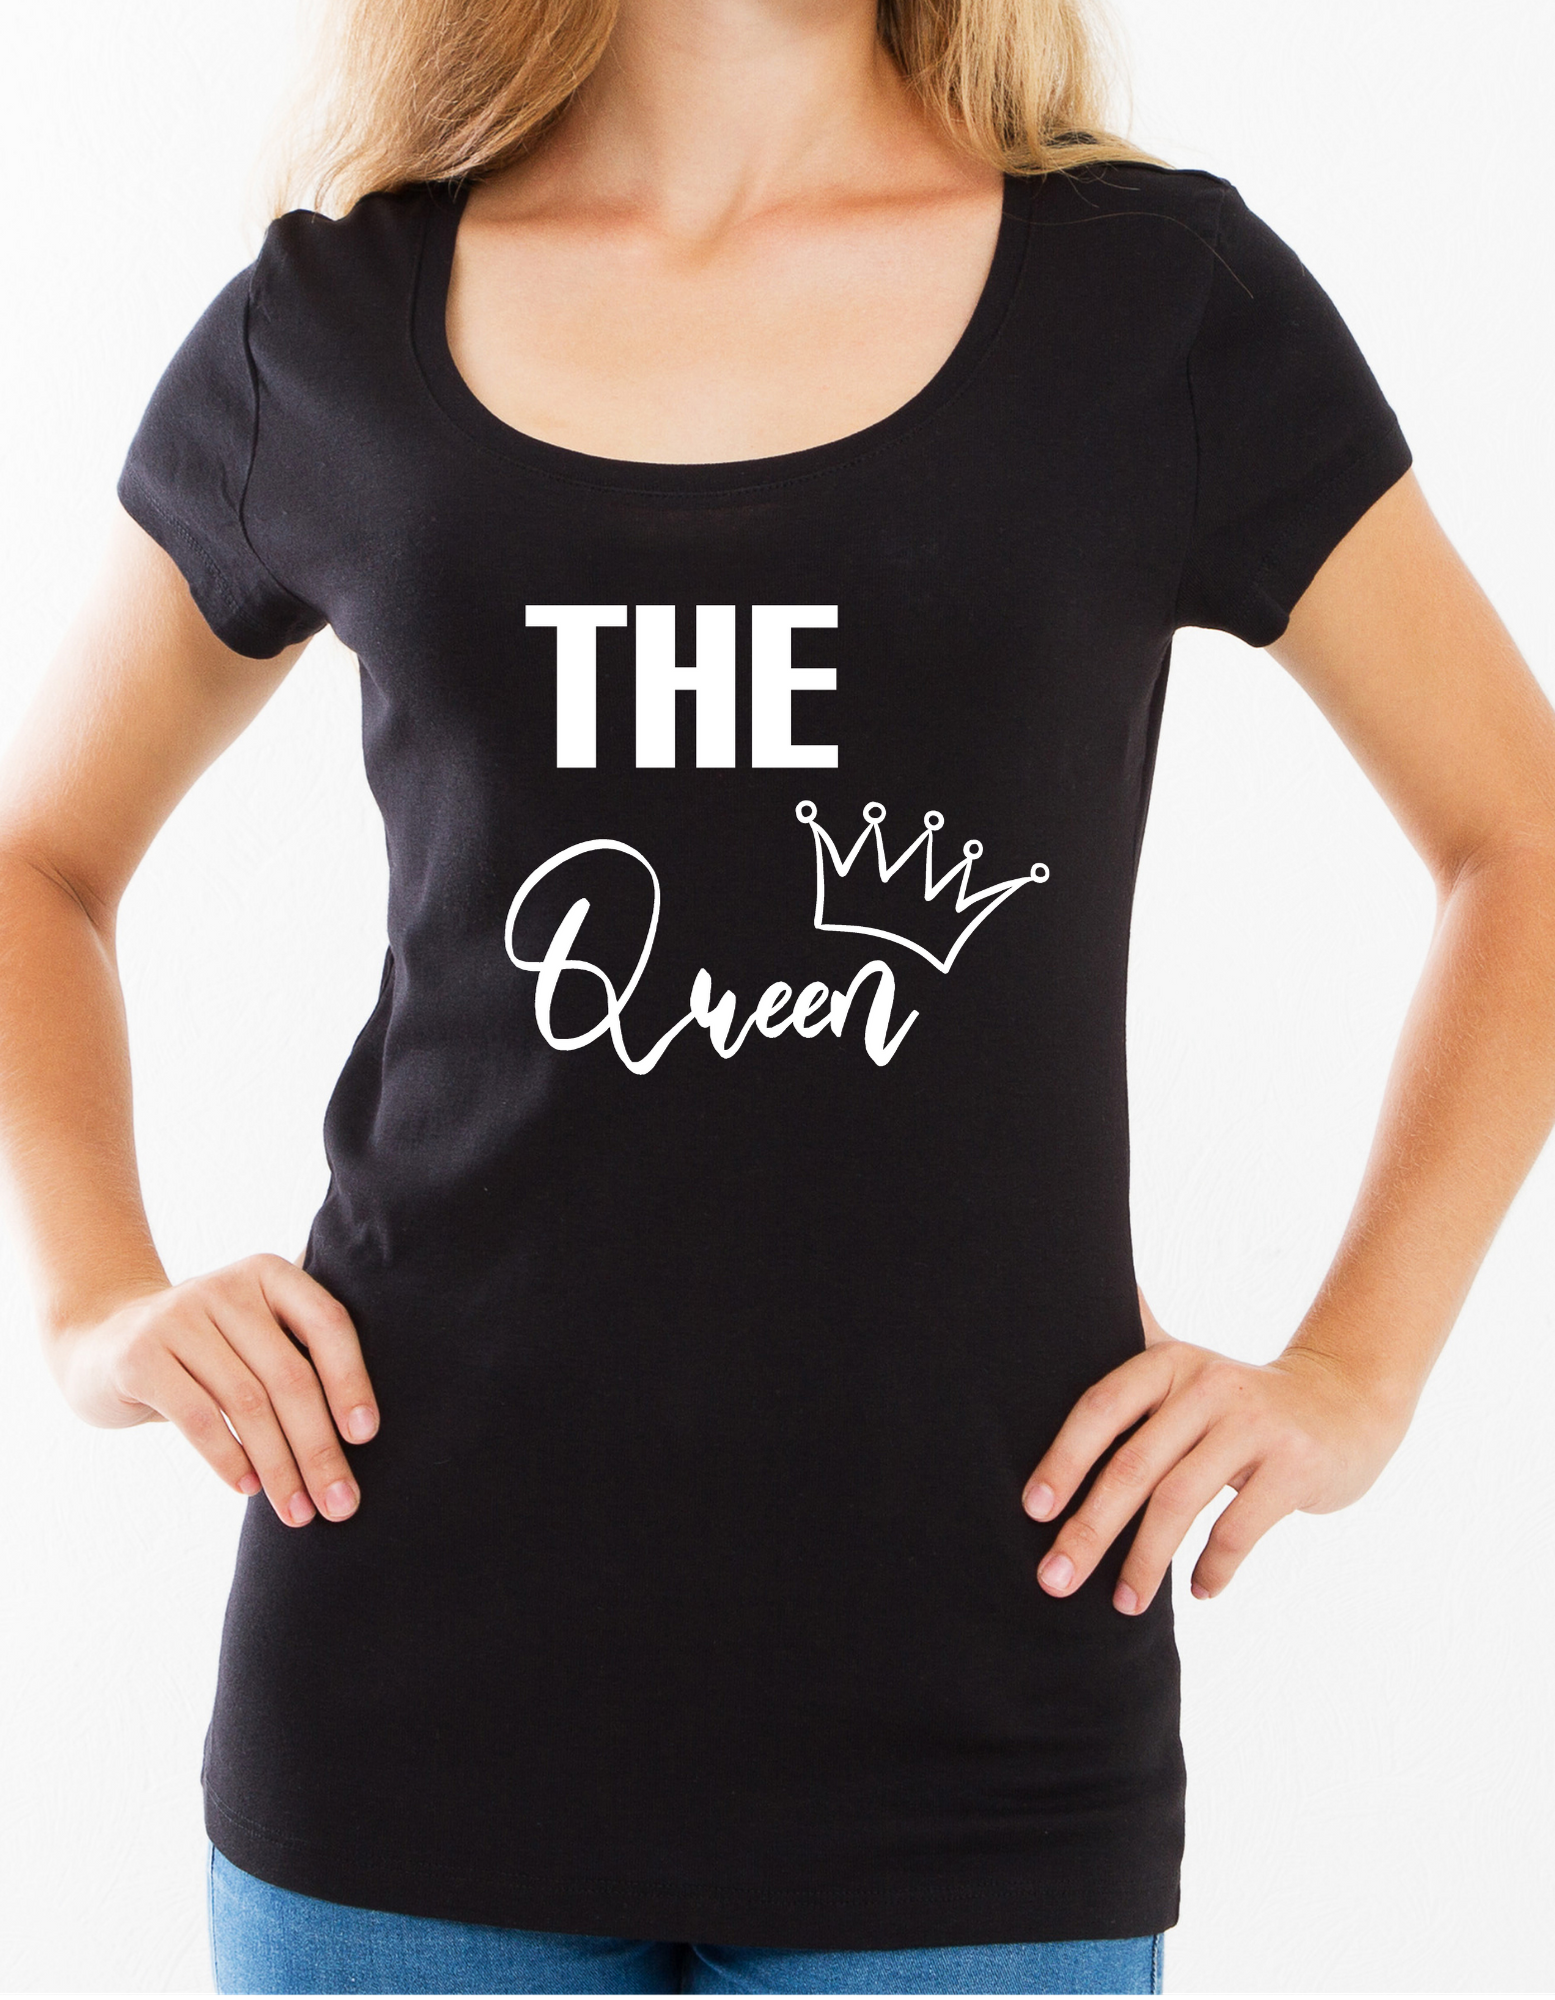 "The Queen" Ladies Tee - MamaBuzz Creations